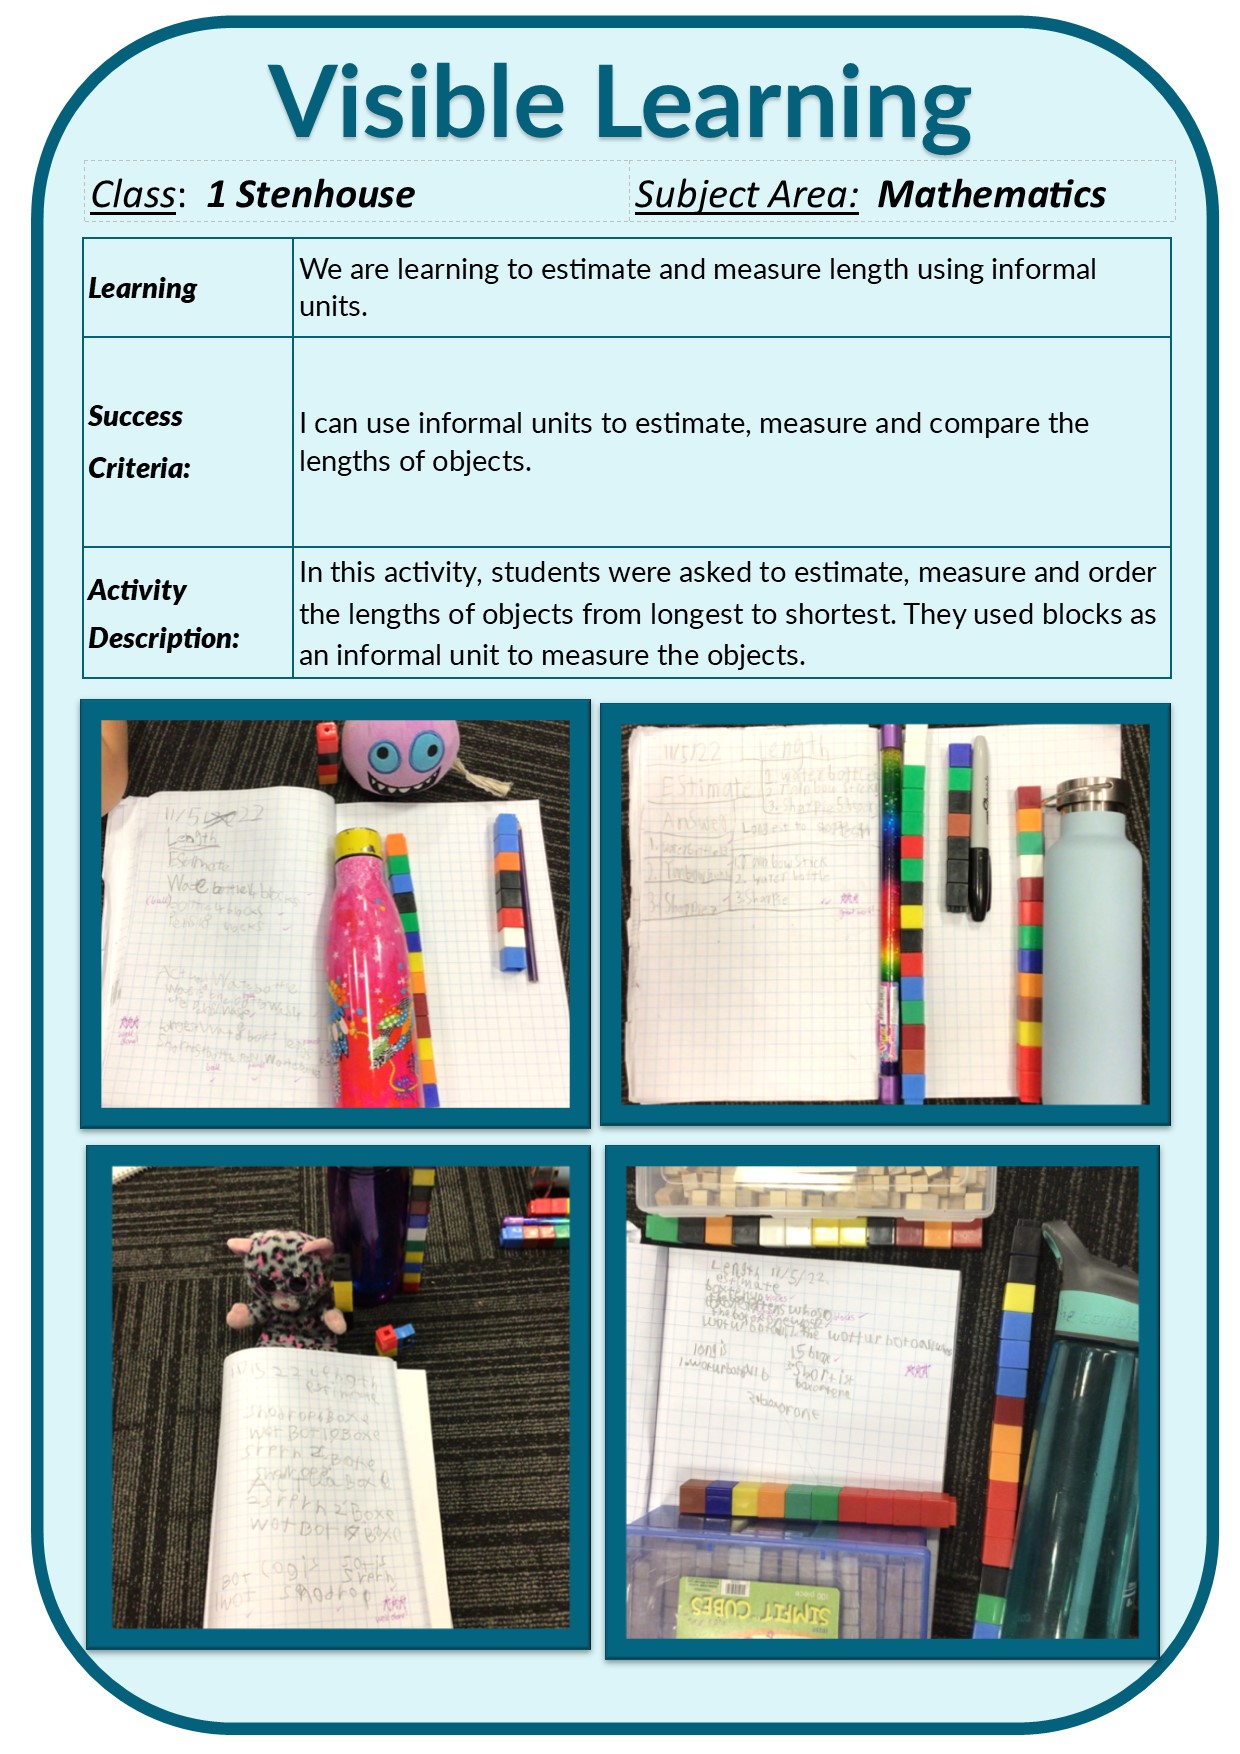 Visible Learning/1 Stenhouse Numeracy Term 2 Week 4or5.jpg